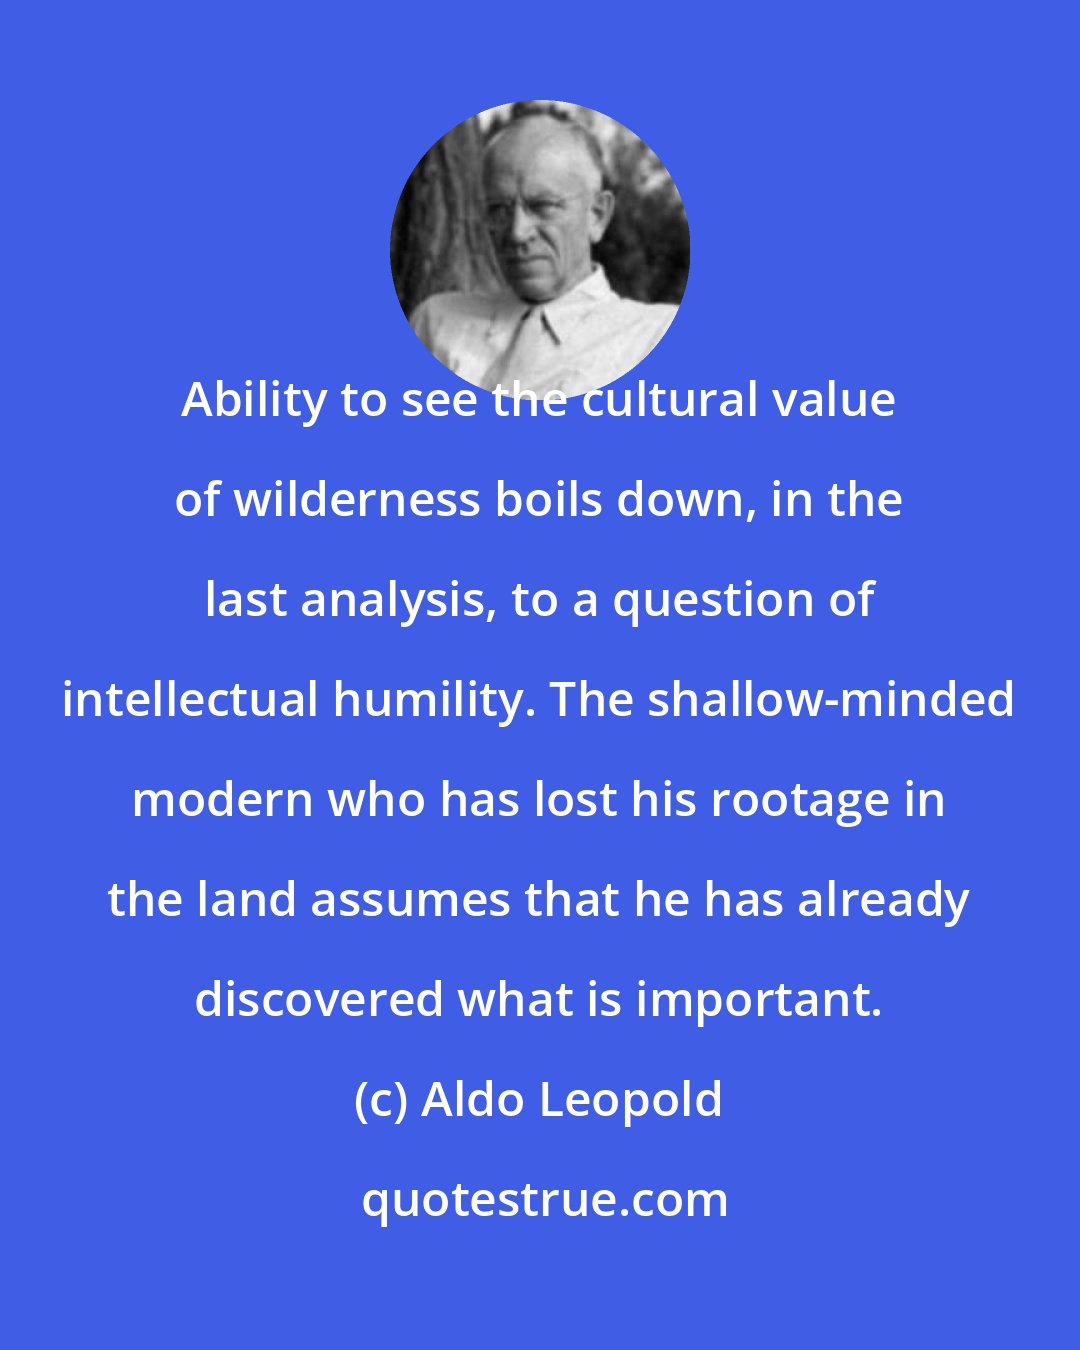 Aldo Leopold: Ability to see the cultural value of wilderness boils down, in the last analysis, to a question of intellectual humility. The shallow-minded modern who has lost his rootage in the land assumes that he has already discovered what is important.